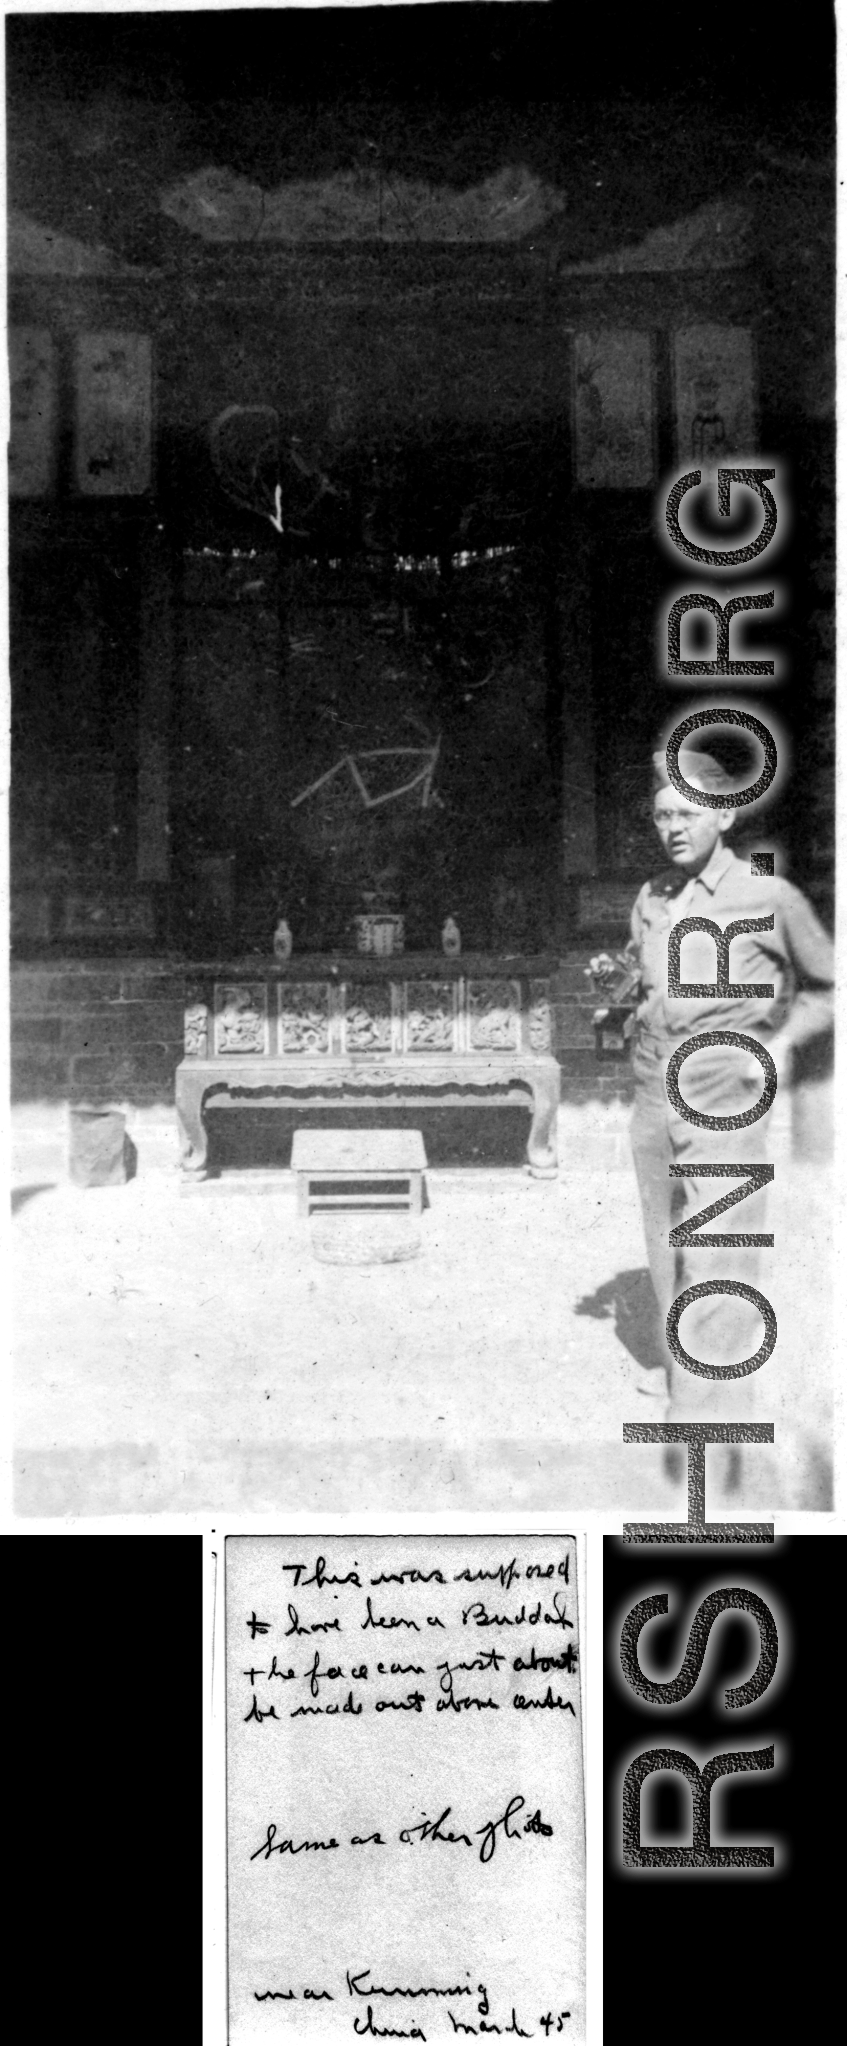 GI at Buddhist temple near Kunming, March 1945.